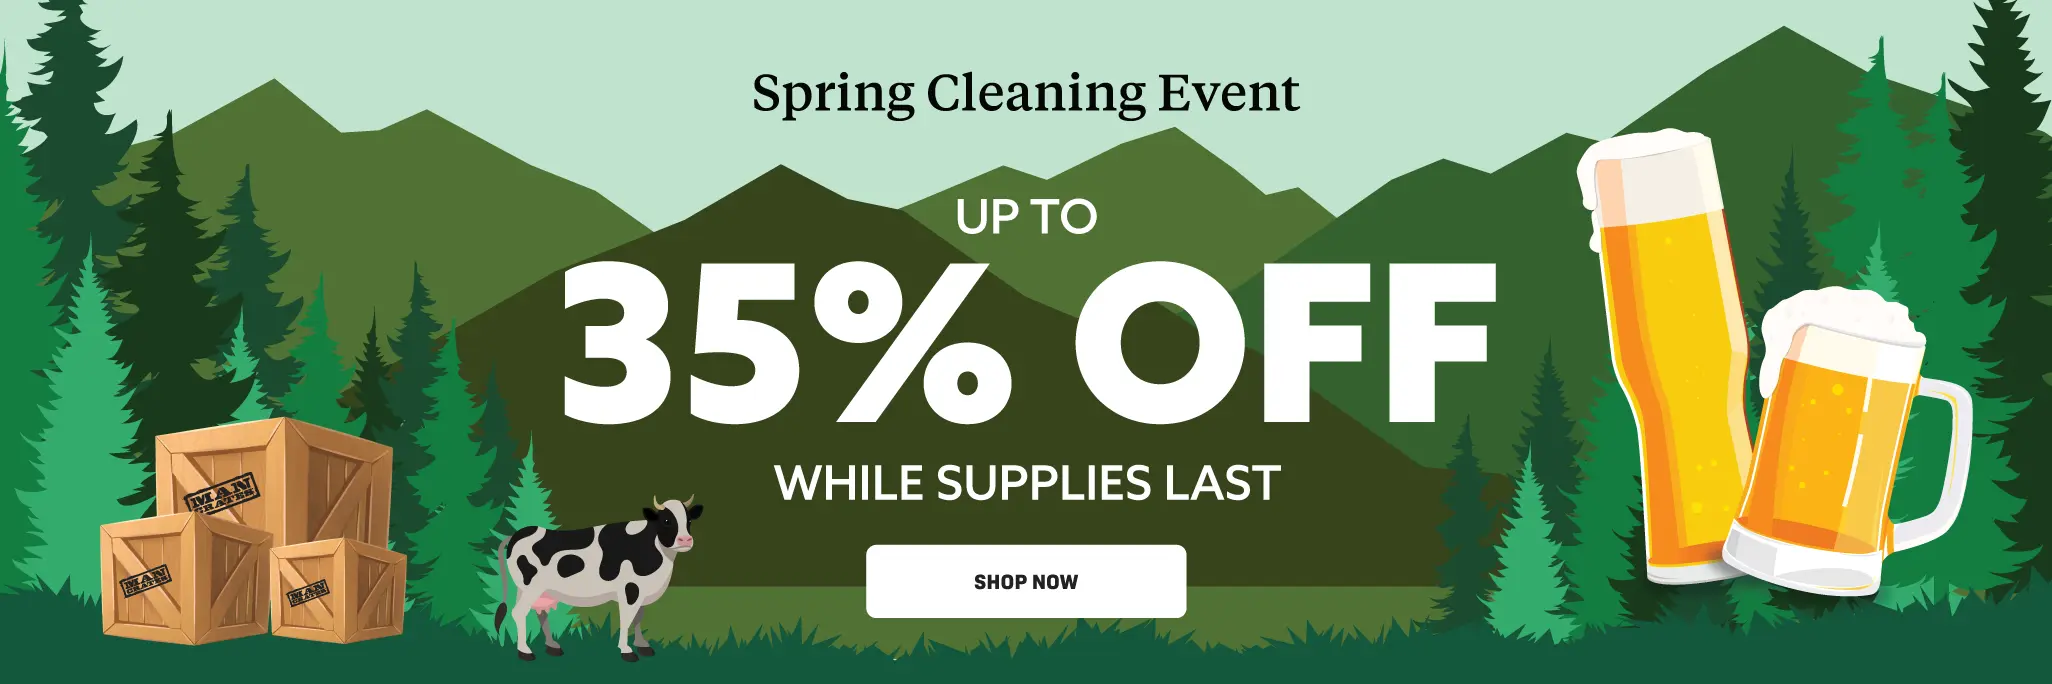 Up To 35% Off During Our Spring Cleaning Event